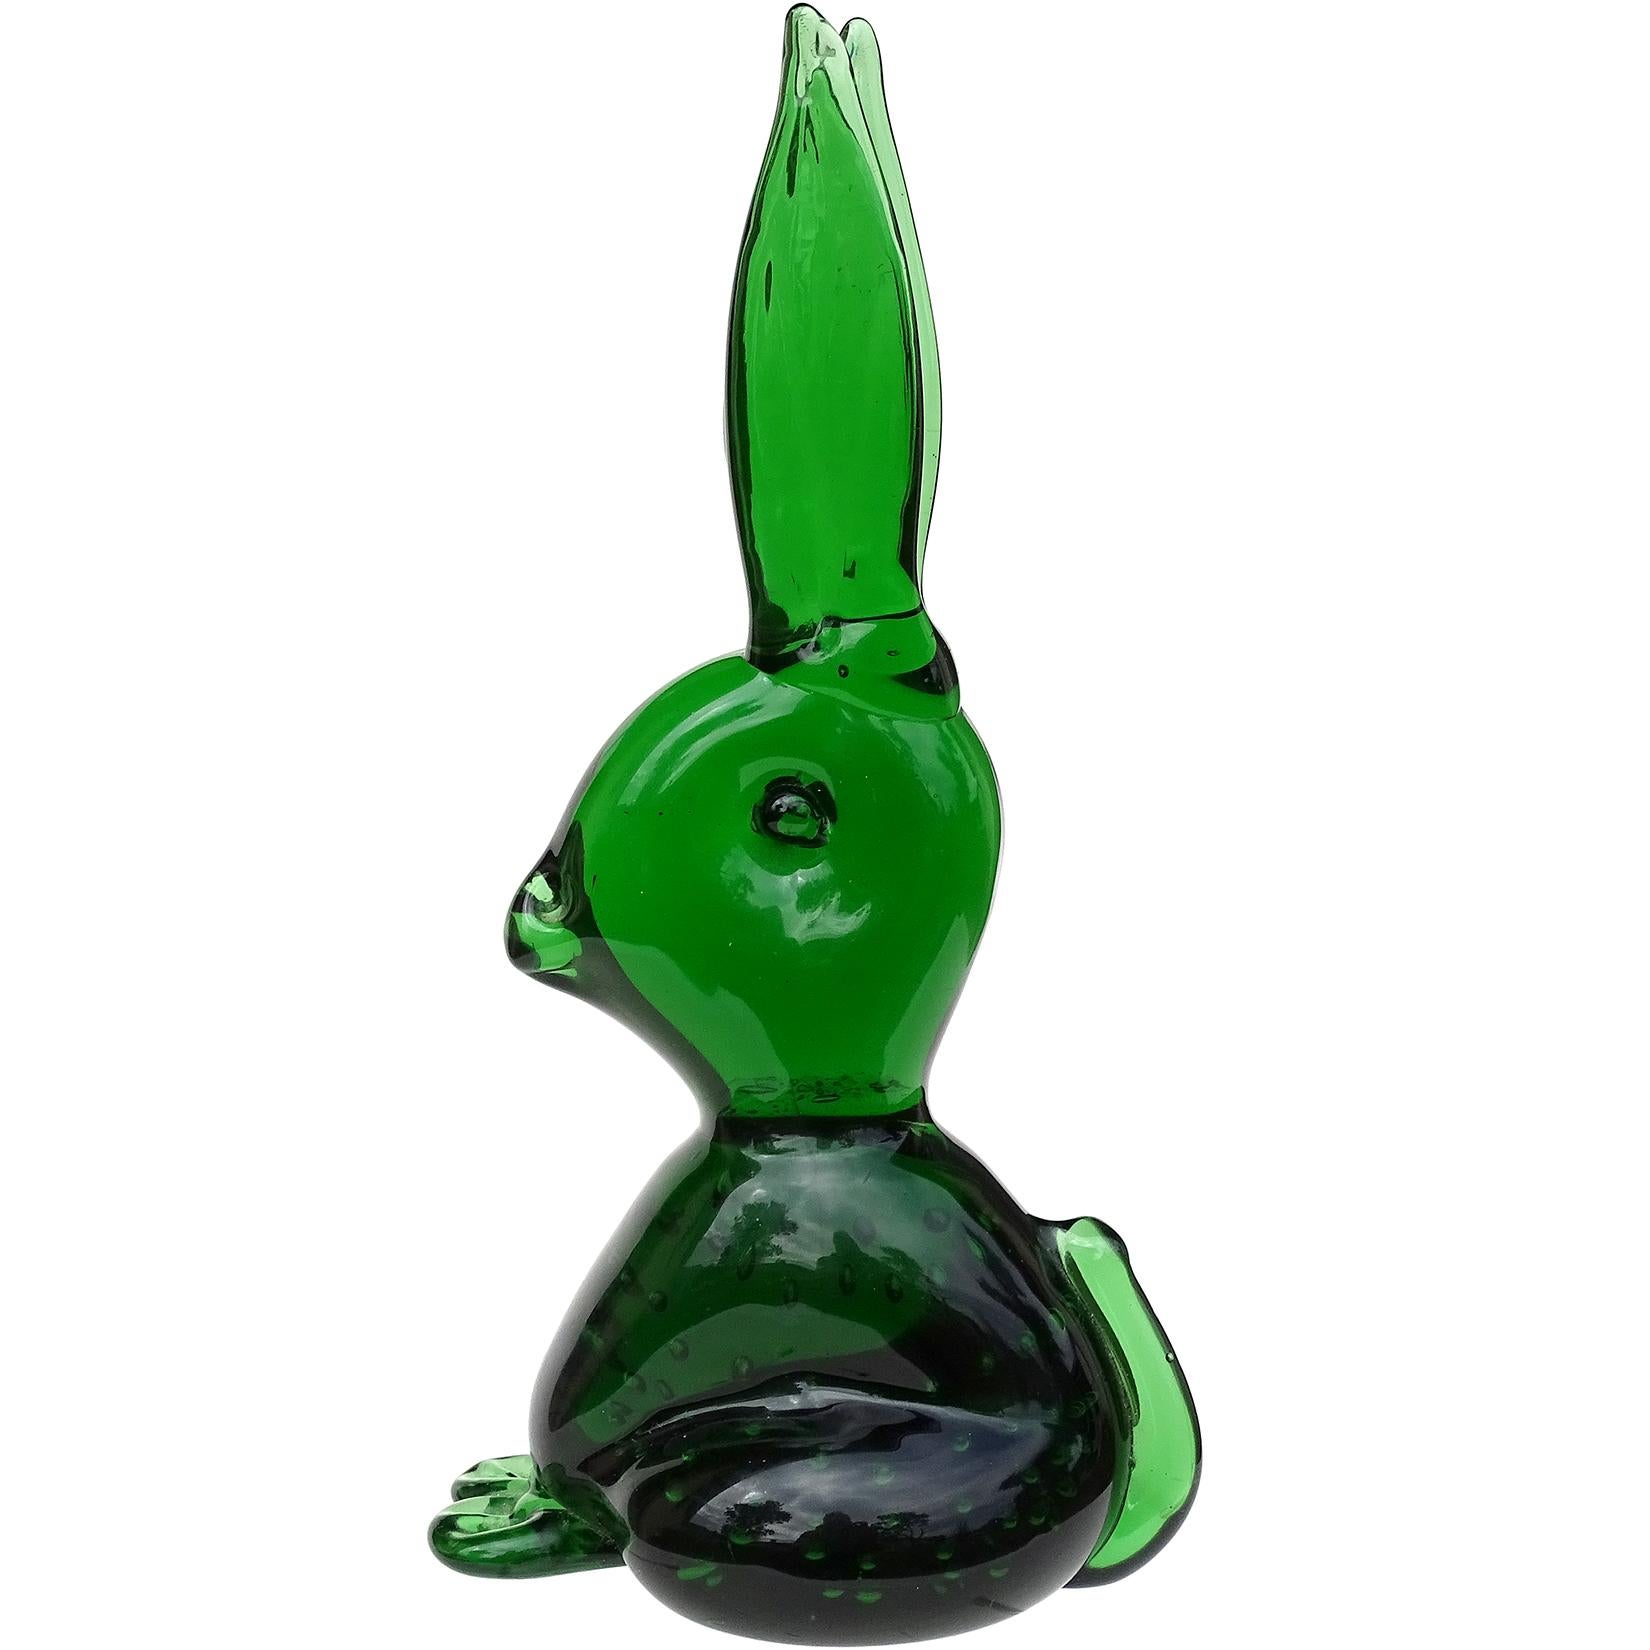 Hand-Crafted Golden Amber Controlled Bubbles Italian Art Glass Vintage Bunny Rabbit Figurine